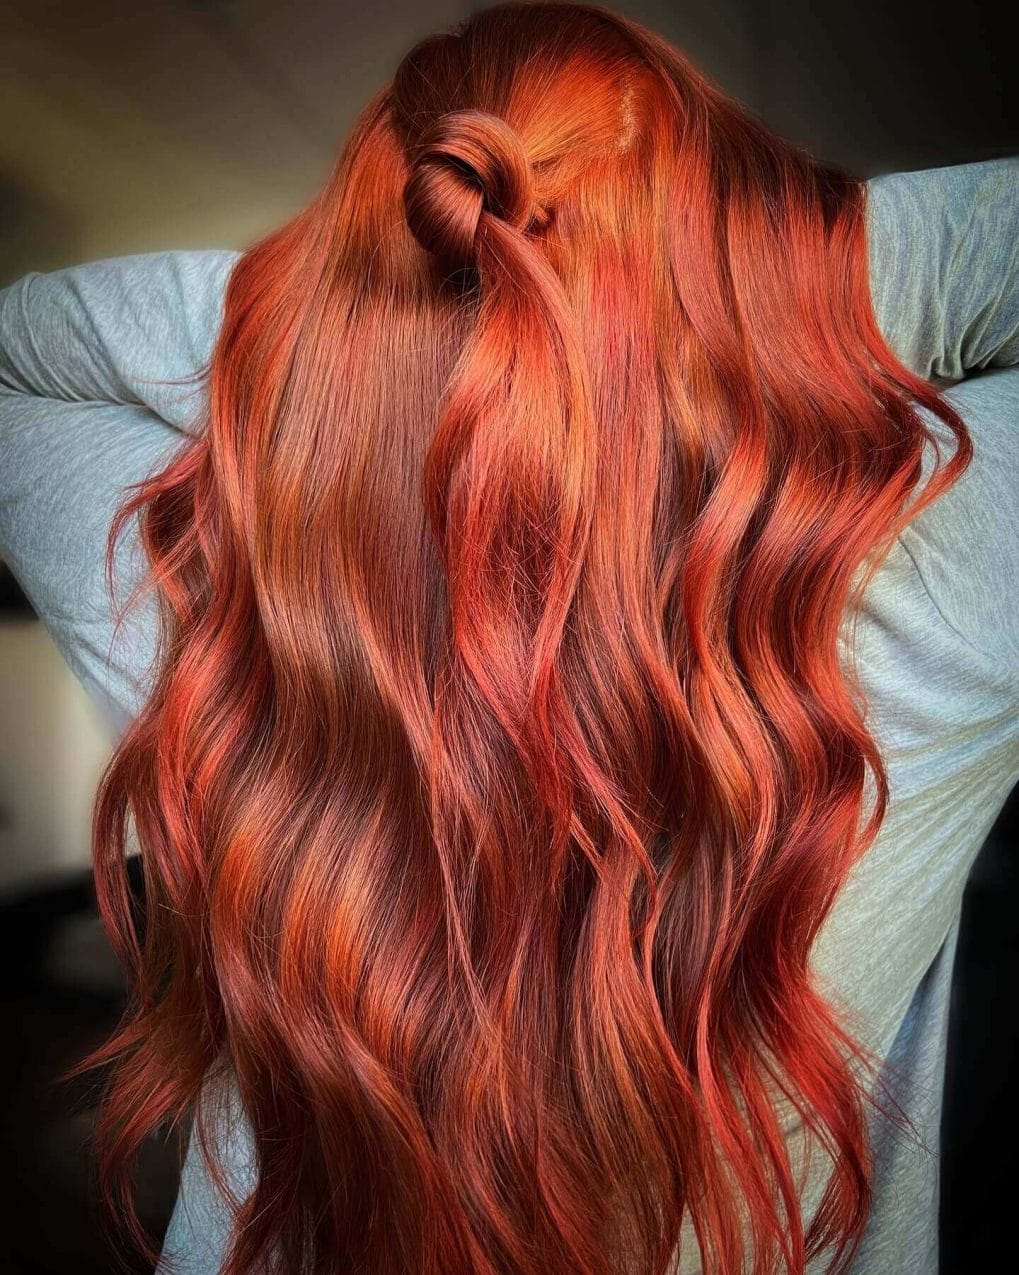 Lava flow waves in fiery red shades from orange to burgundy